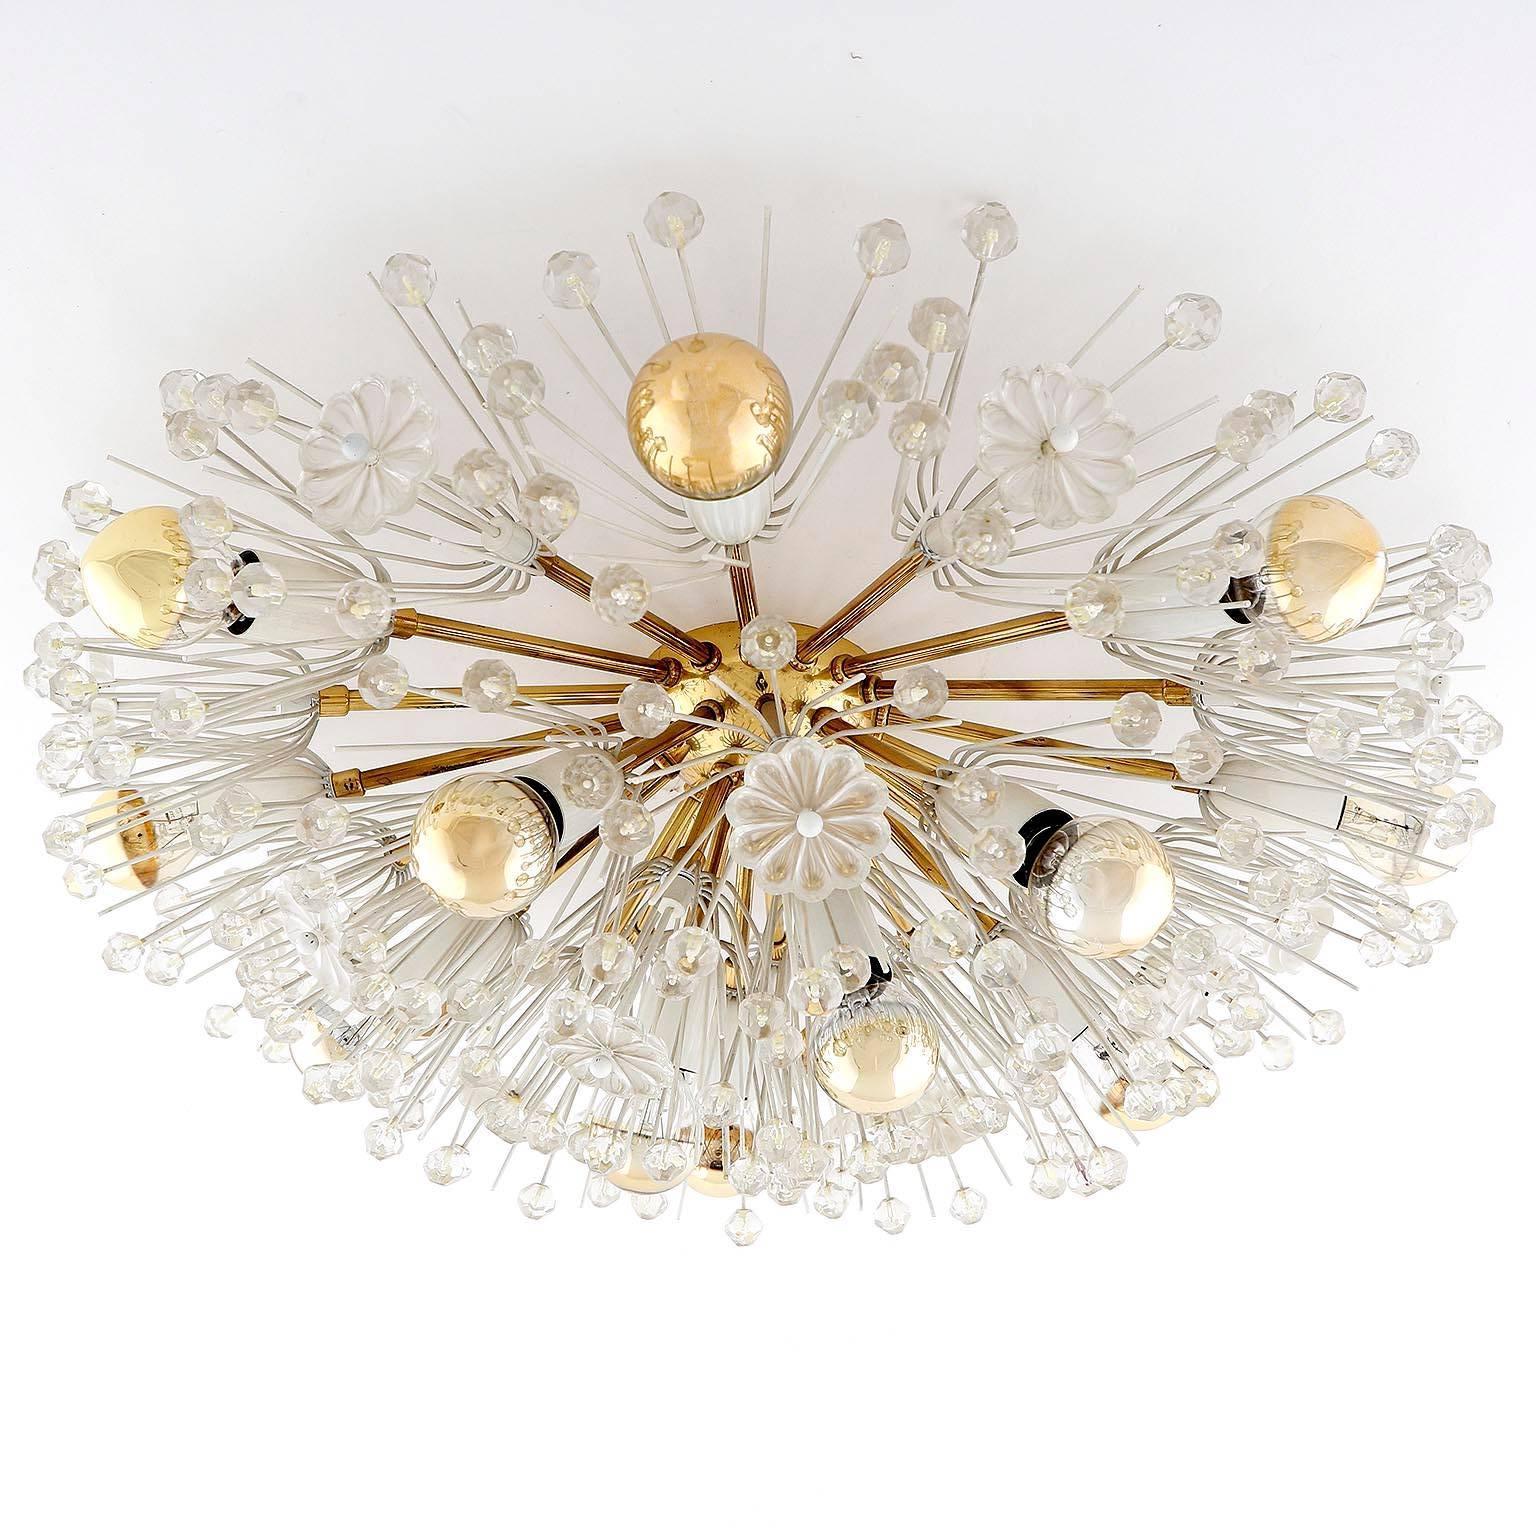 A large and outstanding 1950s Viennese Sputnik / blow ball / snowball light fixture by Emil Stejnar for Rupert Nikoll, Vienna, Austria.
An original vintage piece manufactured in Mid-Century, circa 1950 (1950s-1960s). 
Excellent condition,